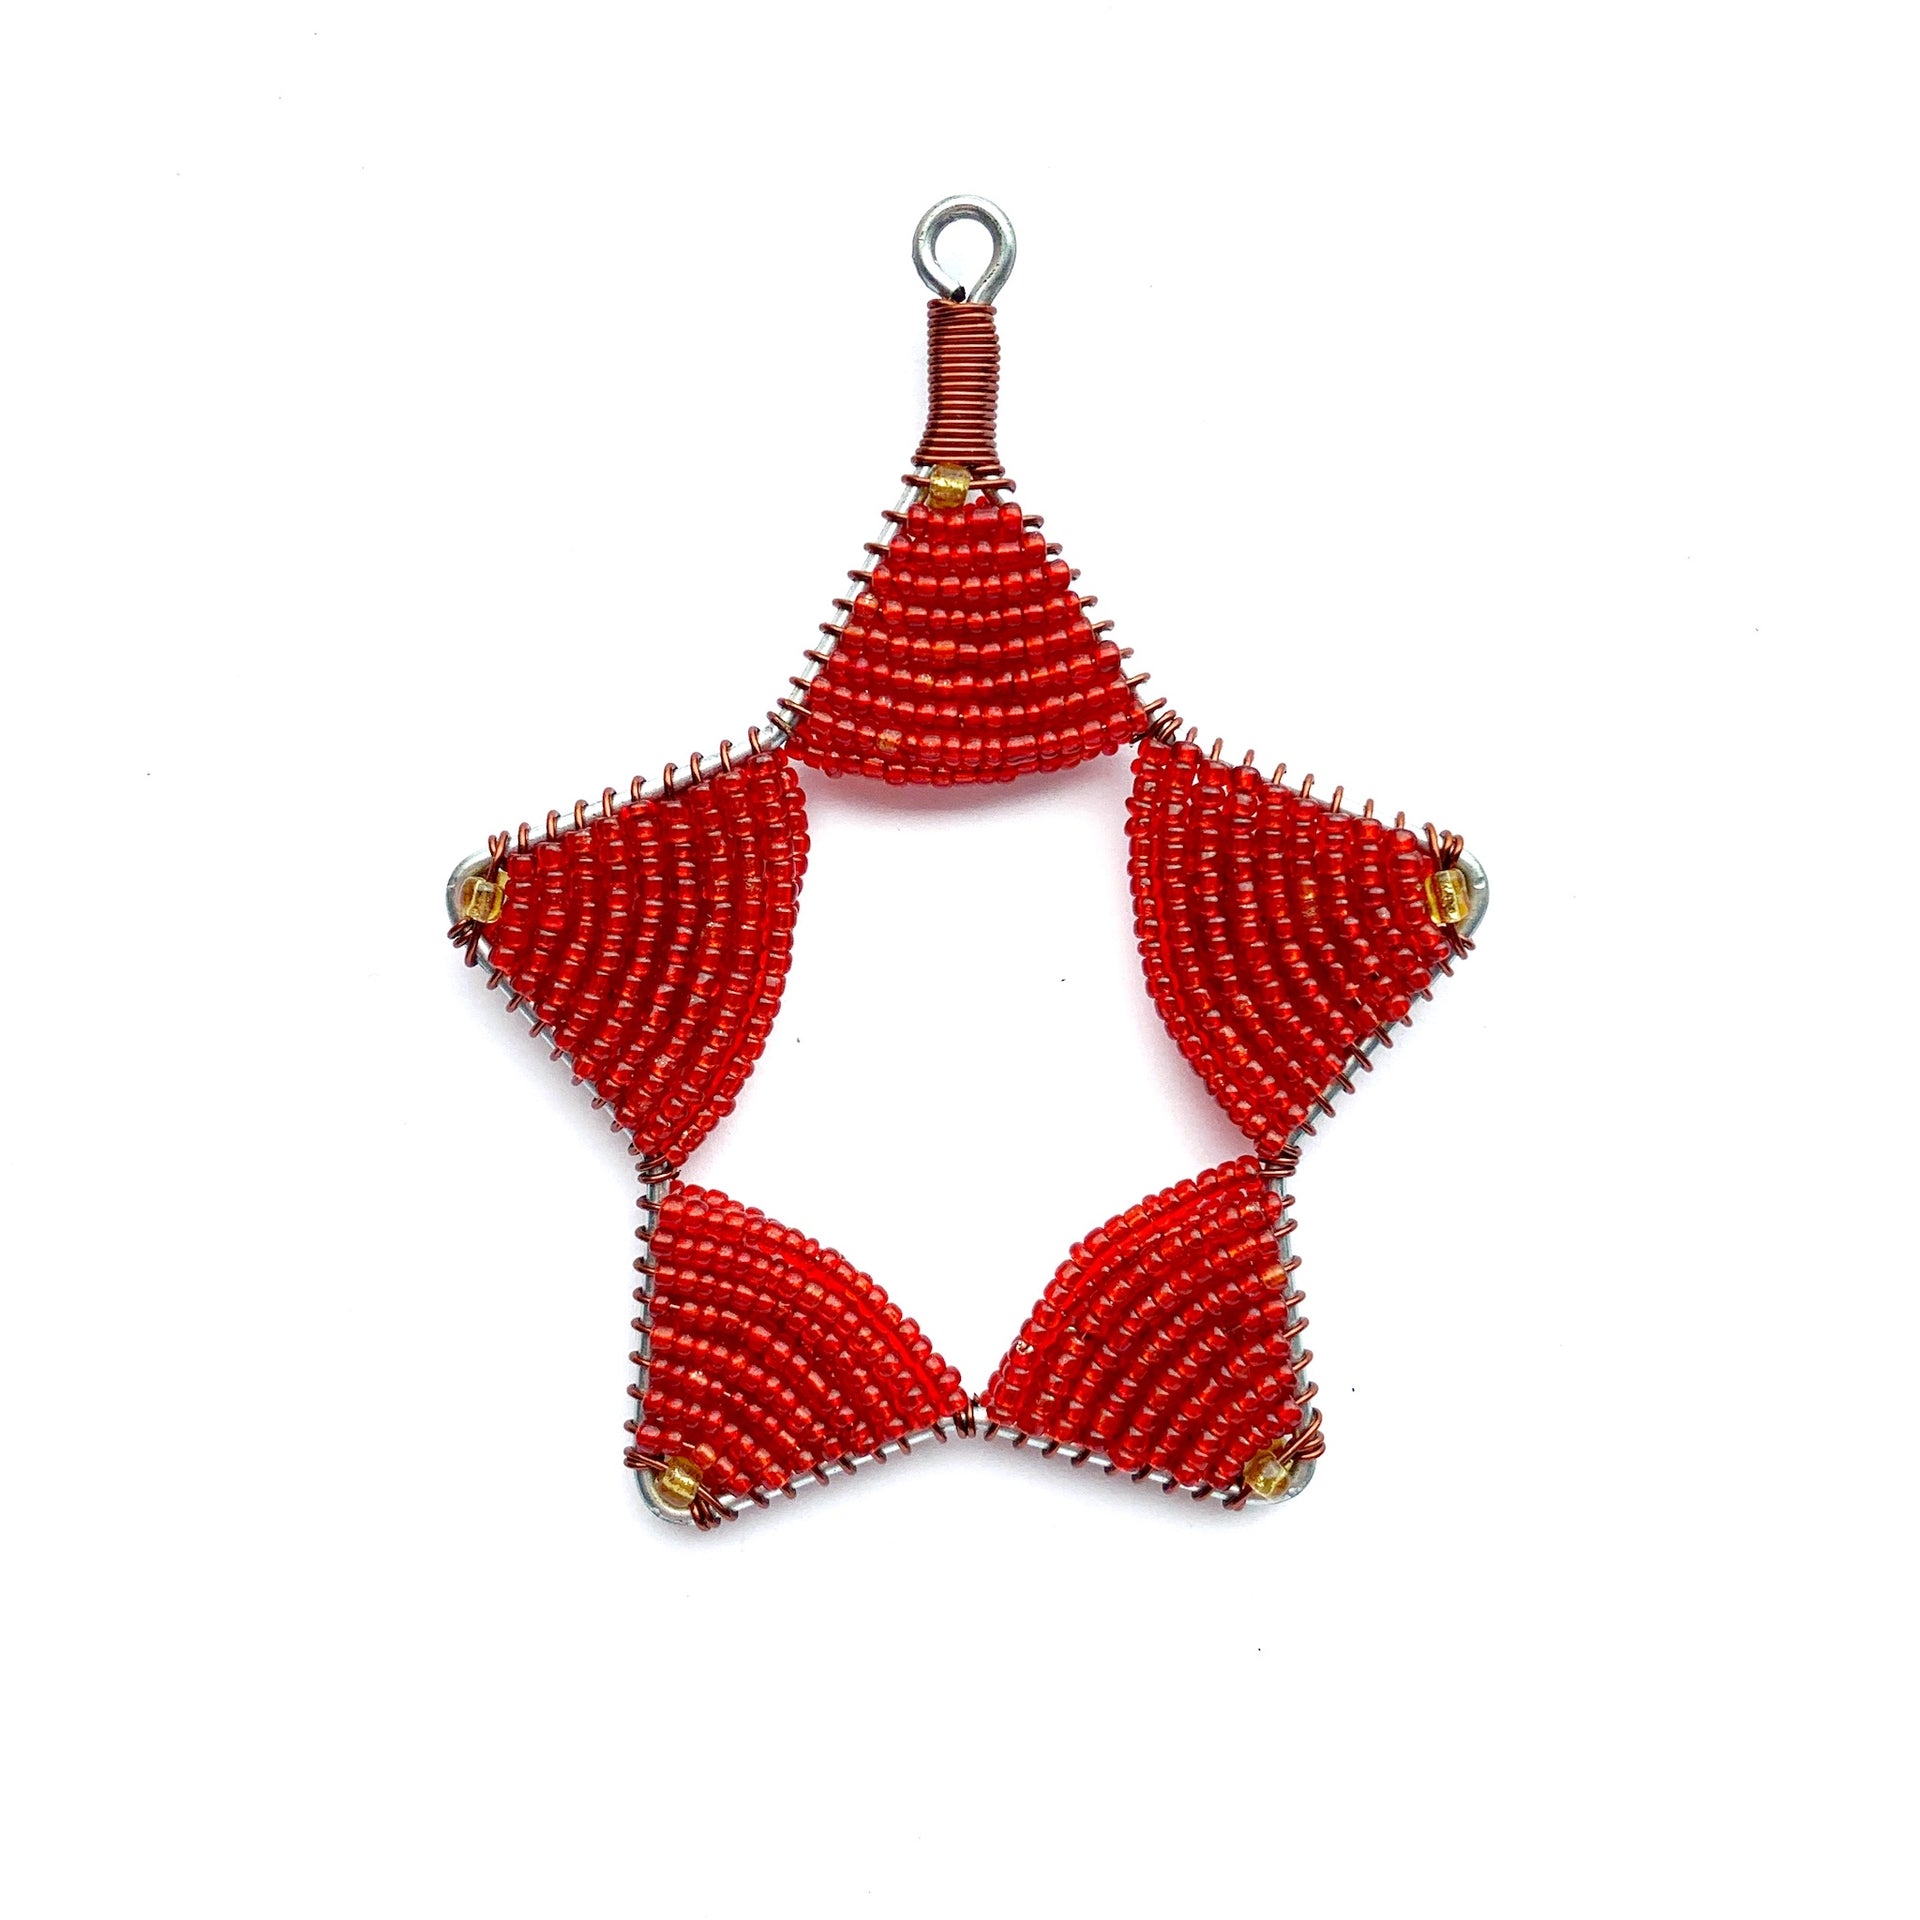 Glass Bead Star Ornament (Assorted Colors)